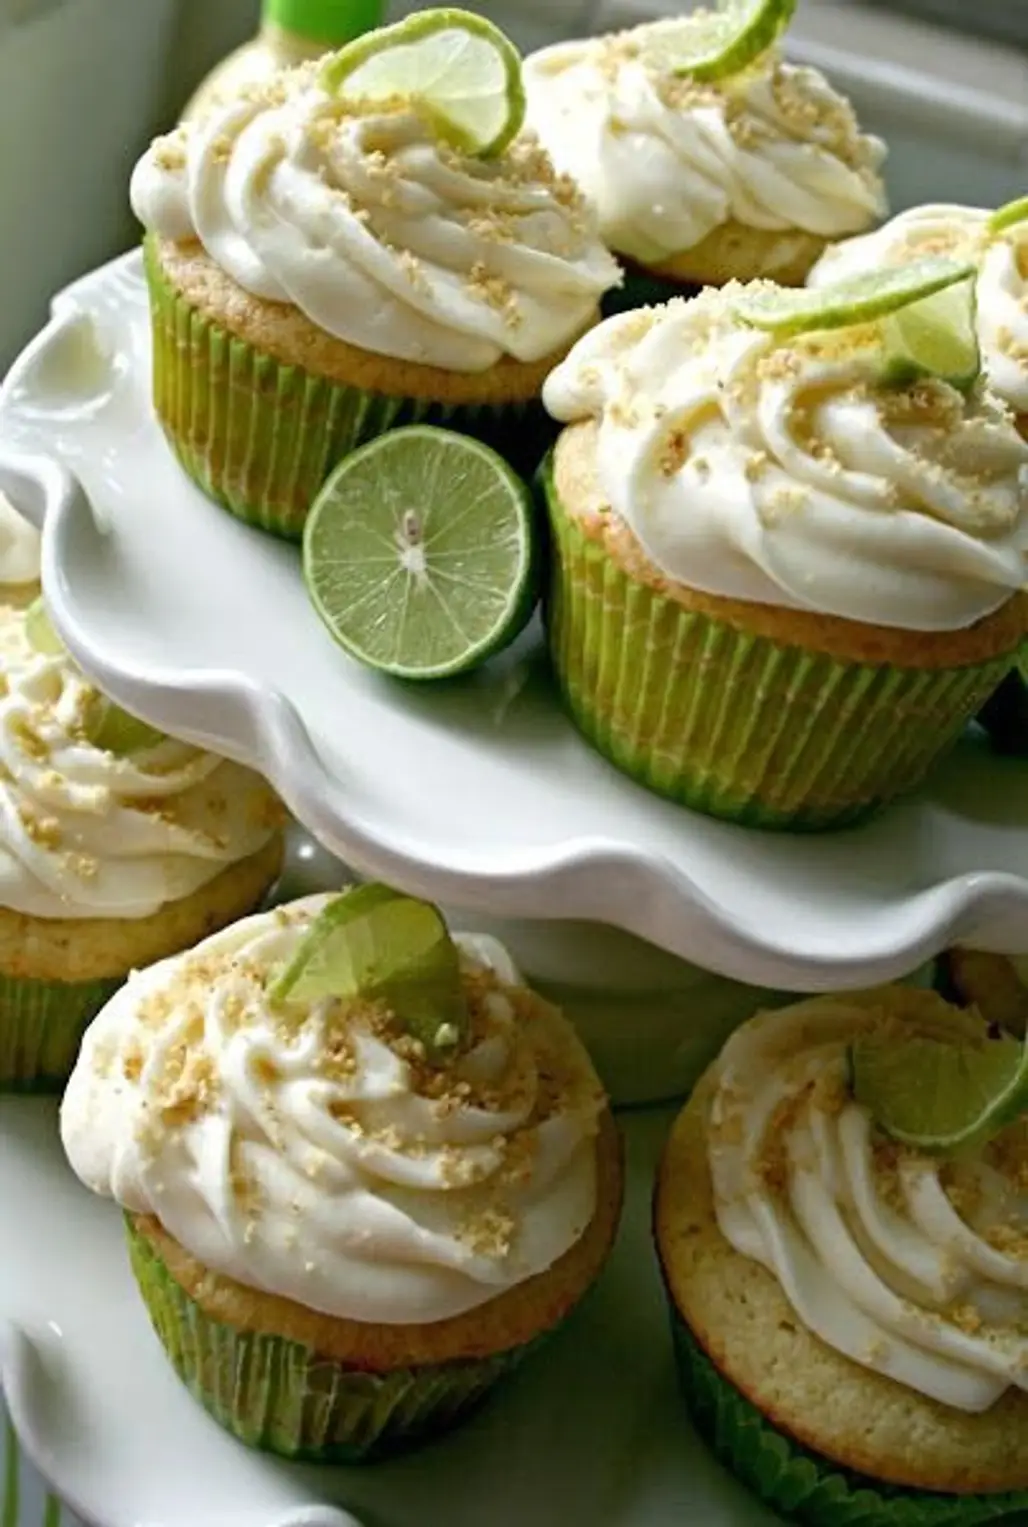 Key Lime Pie Cupcakes with Key Lime Buttercream